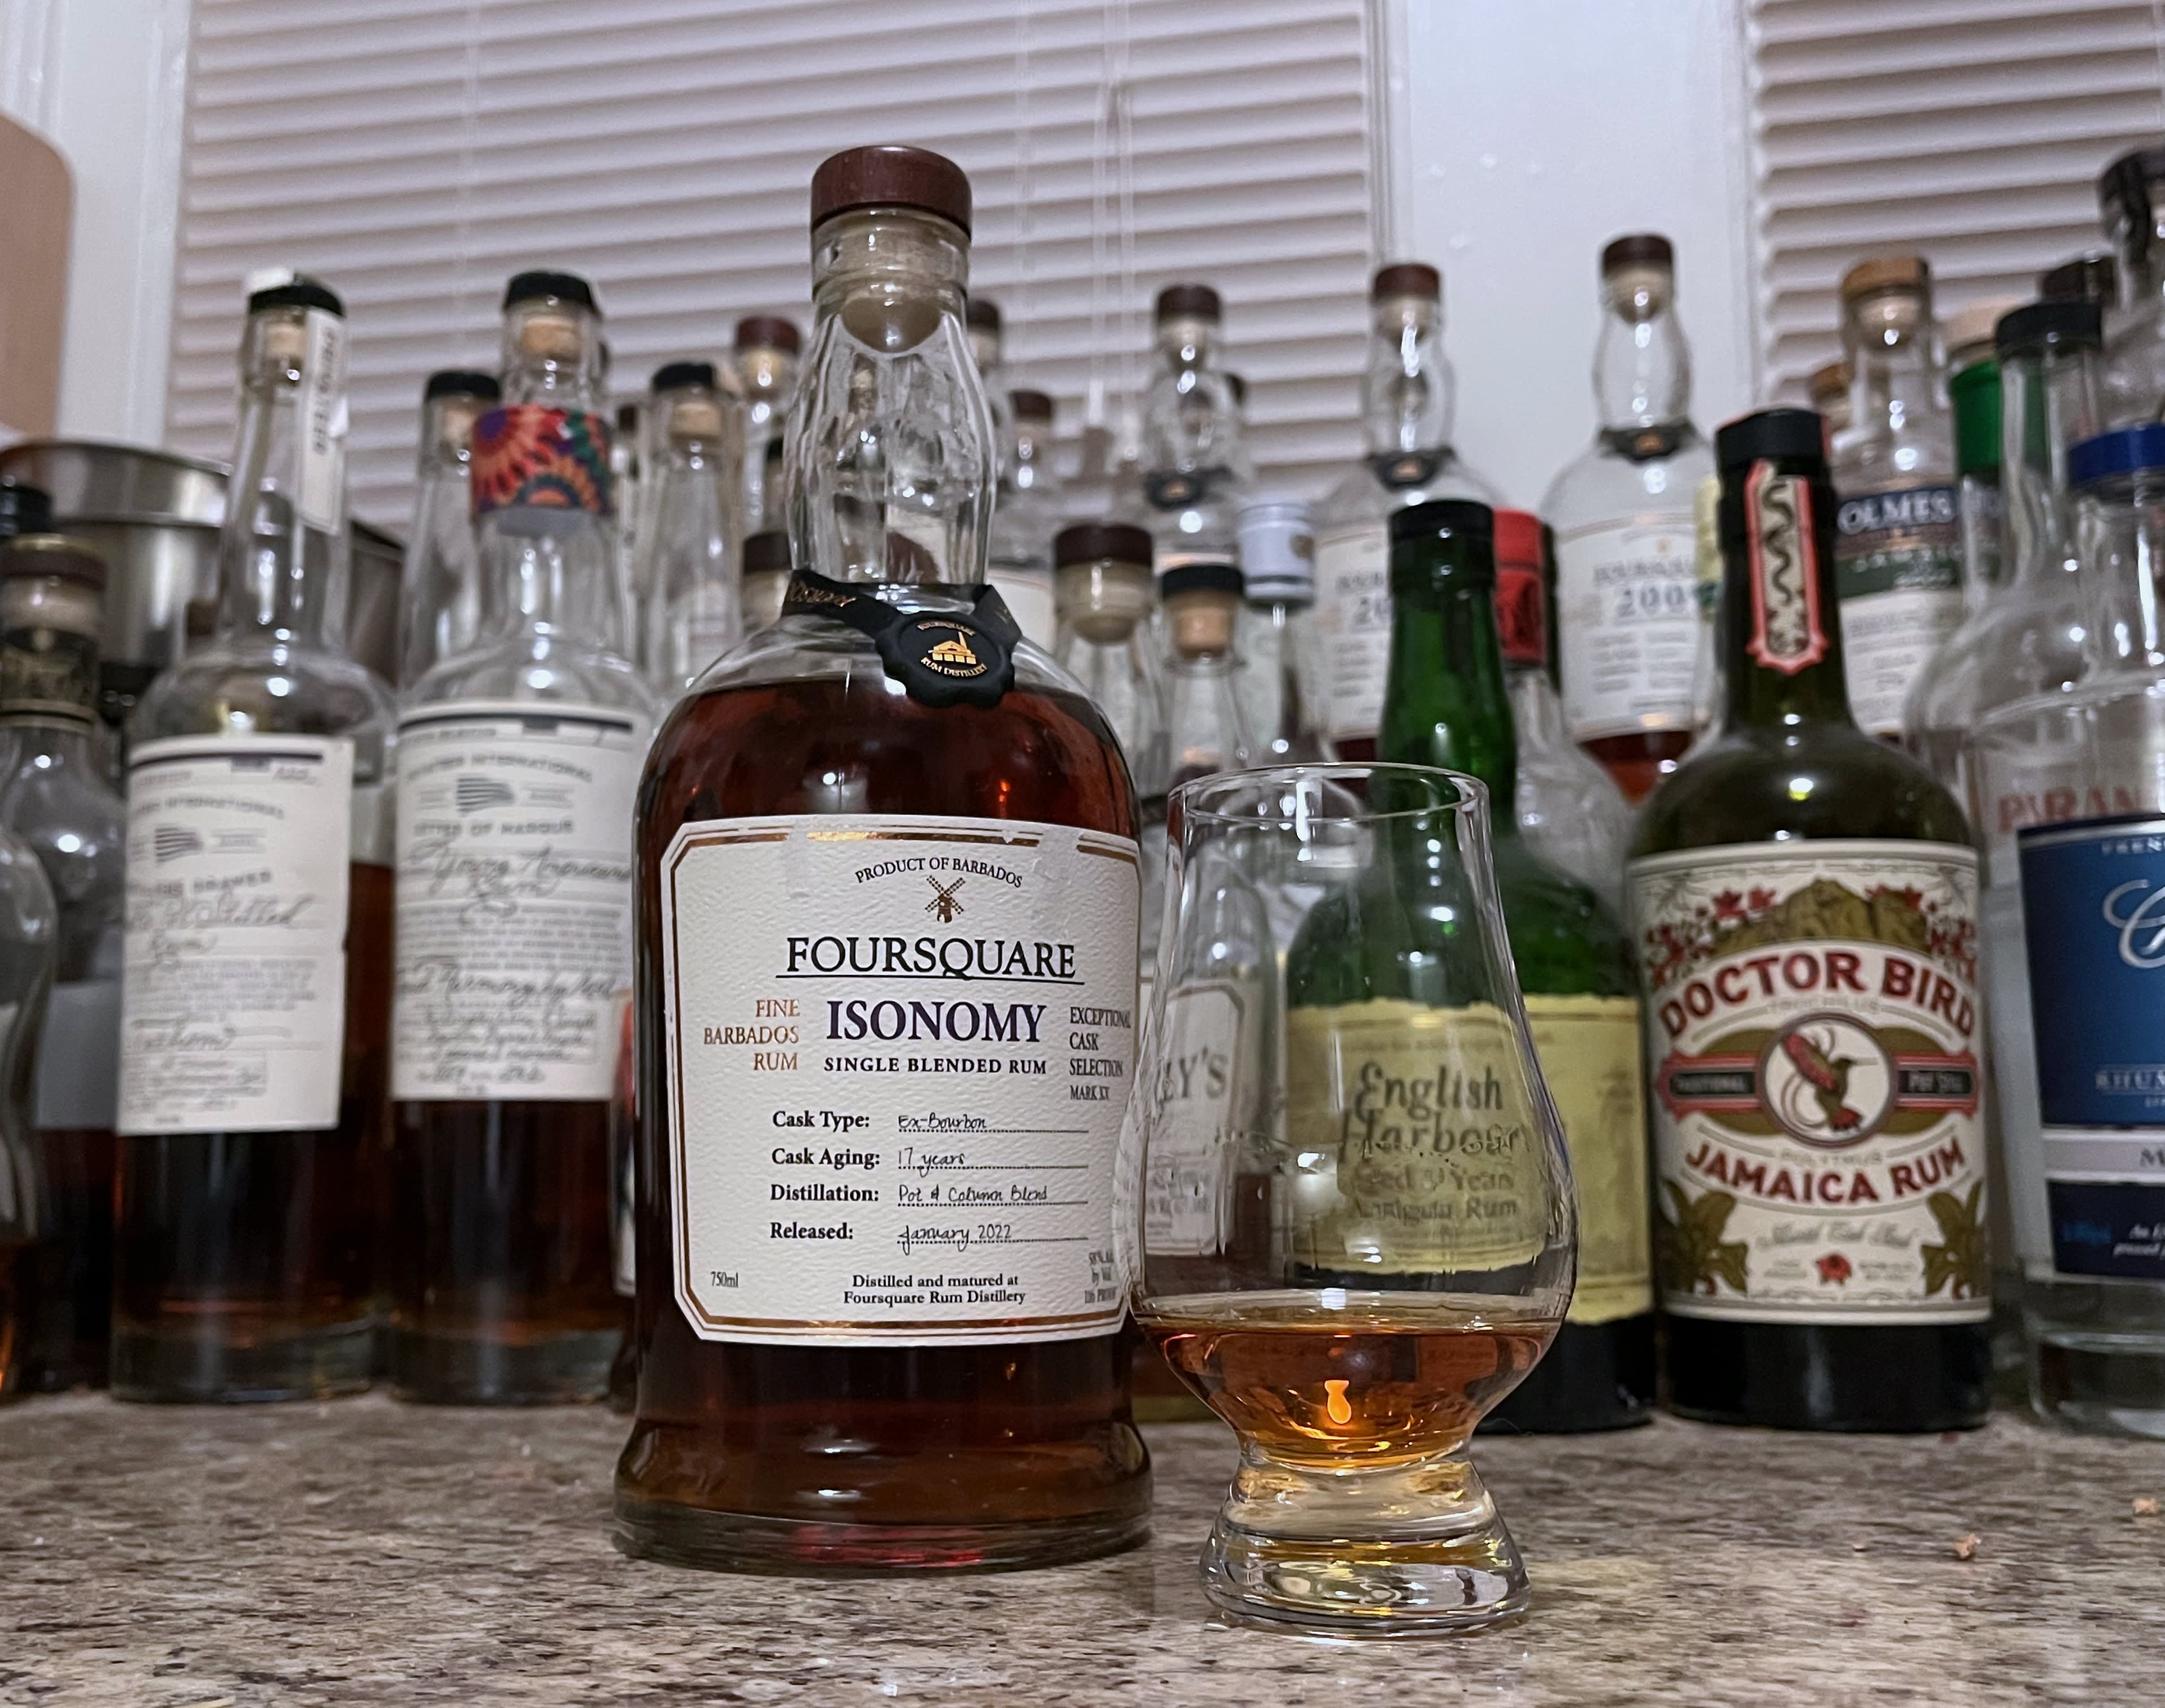 A bottle of Foursquare Isonomy next to a glencairn of rum